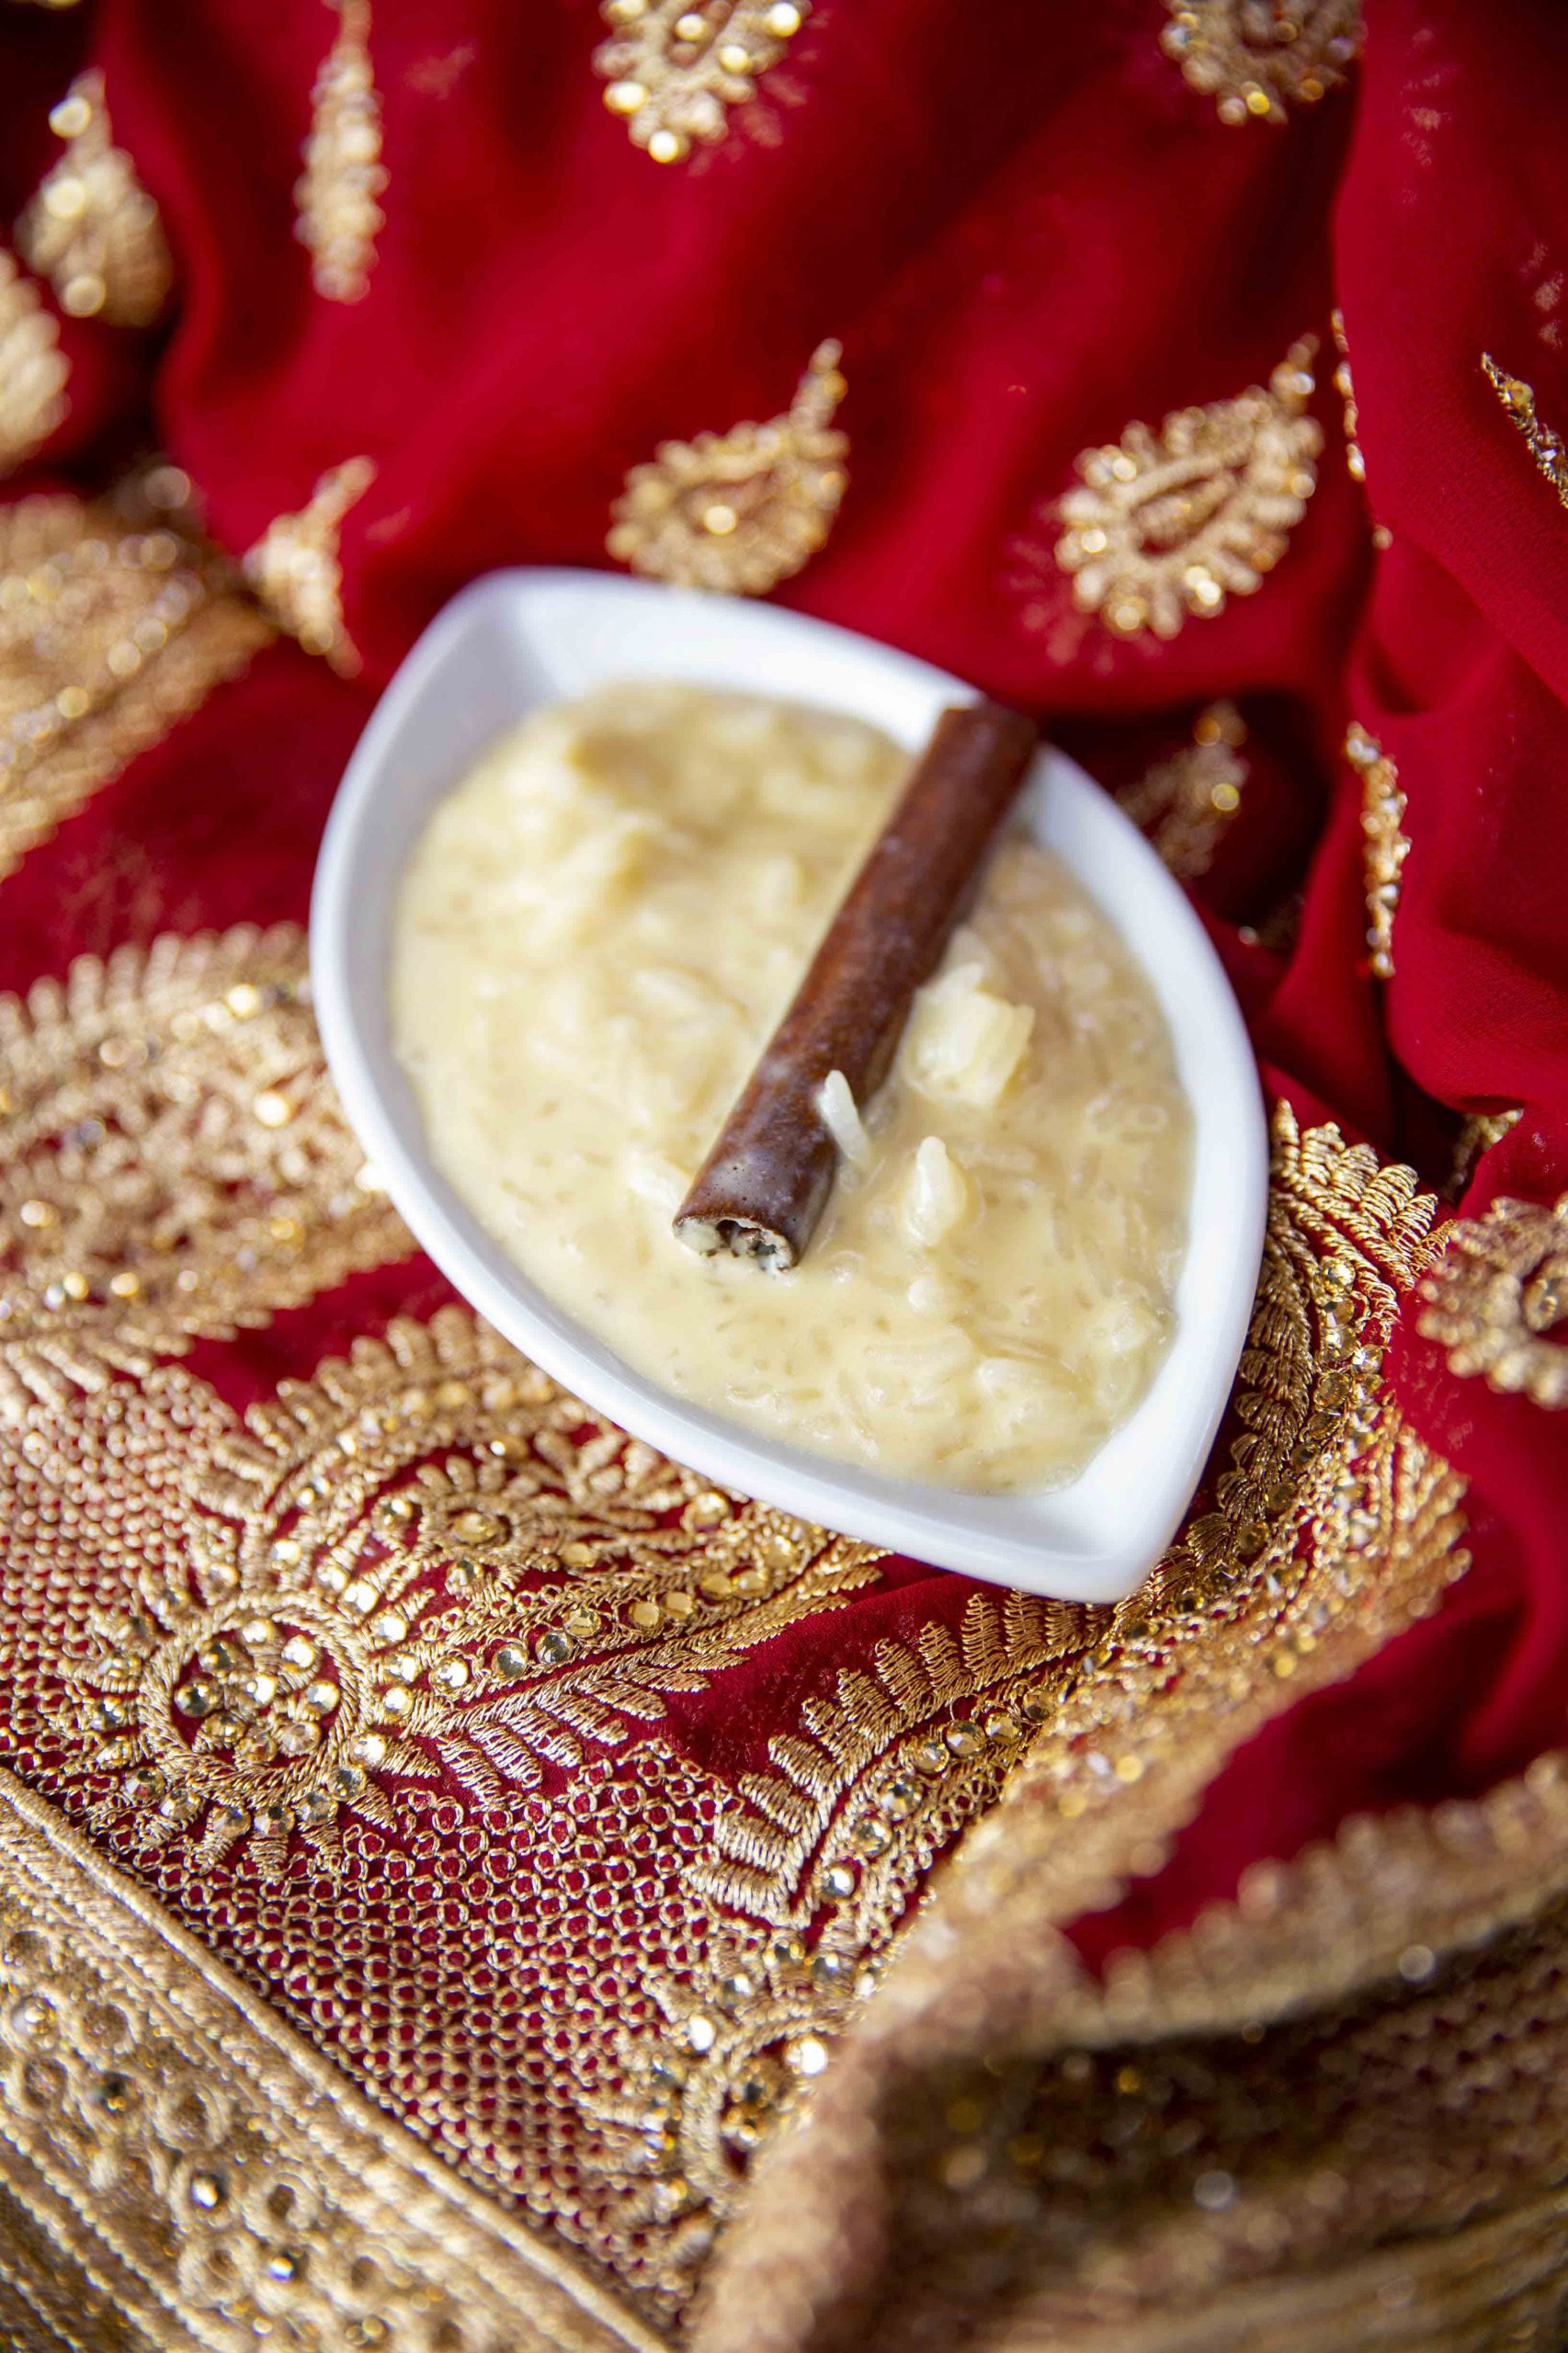 A Sweet Rice Recipe from Trinidad (Caribbean Rice Pudding)